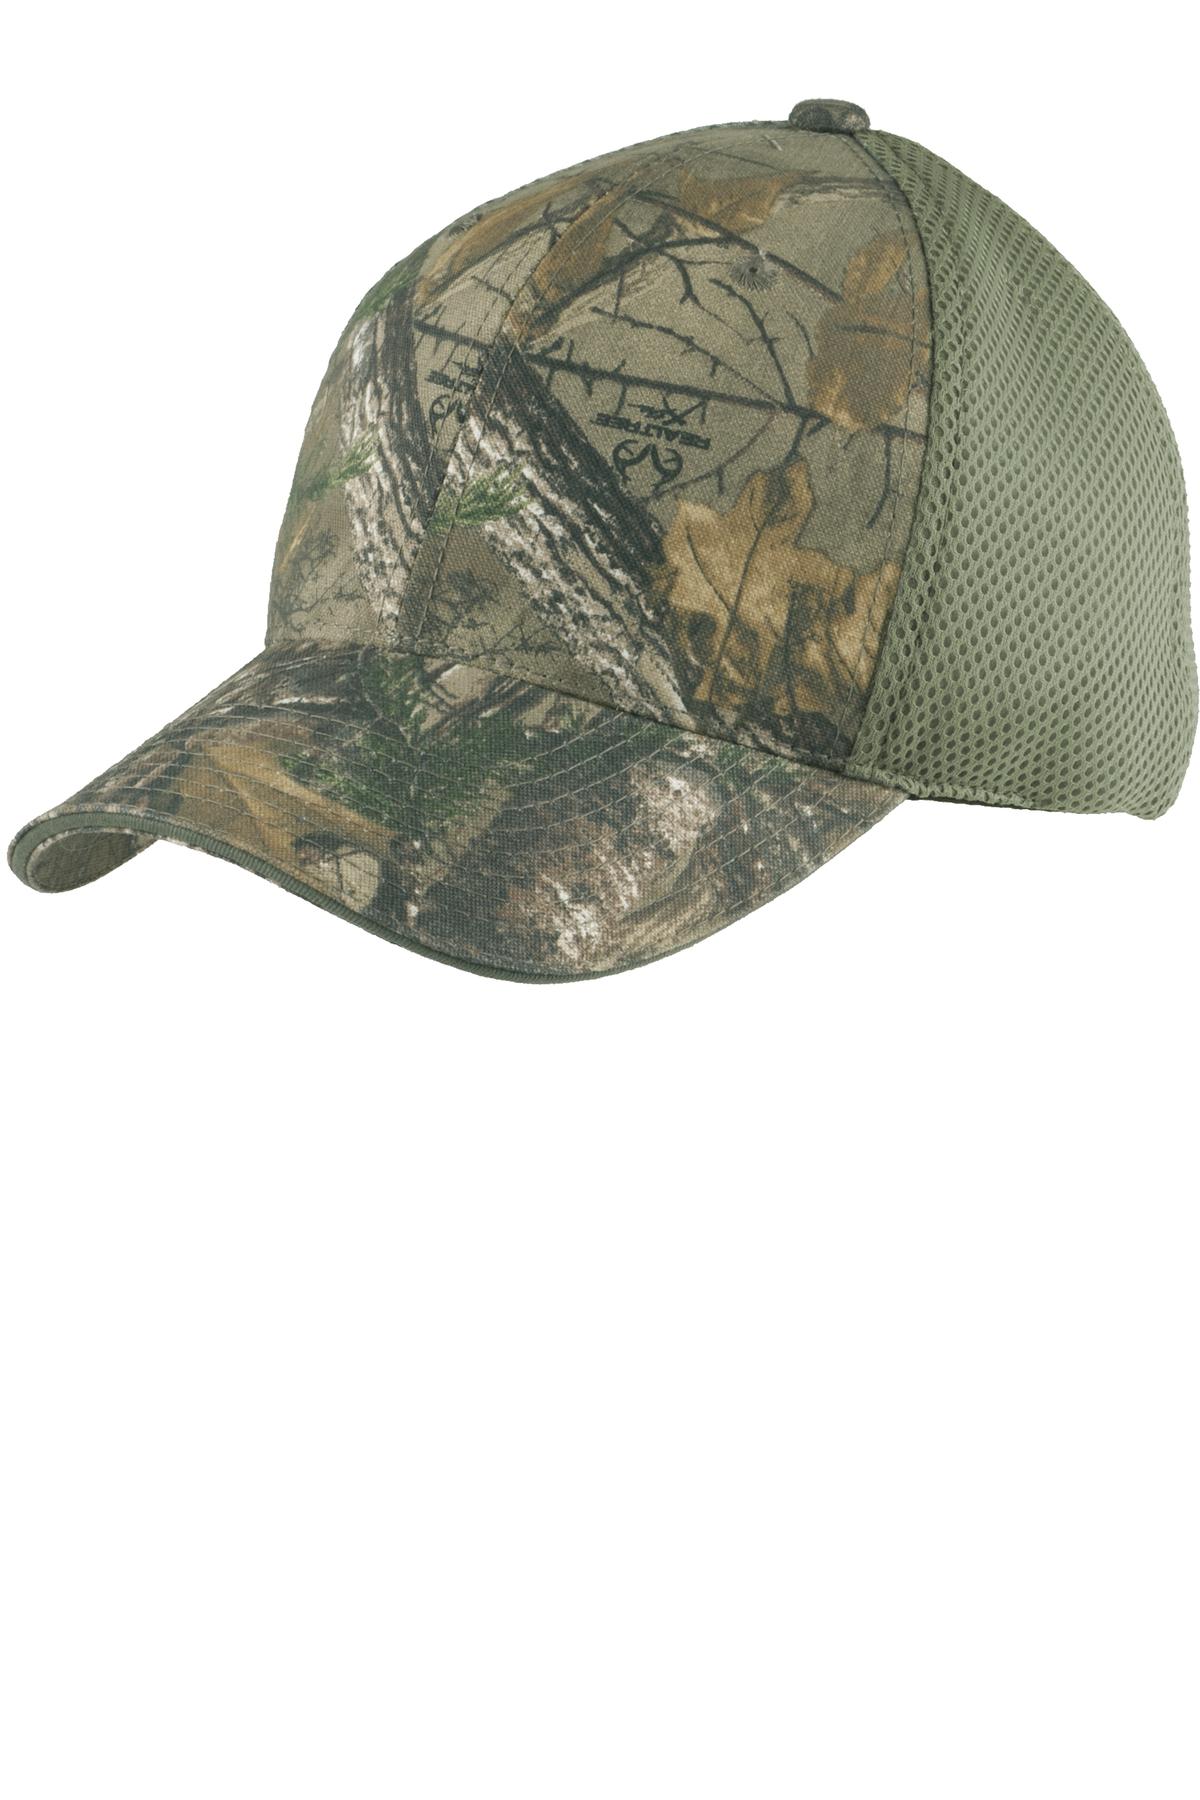 Port Authority Hospitality Caps ® Camouflage Cap with Air Mesh Back.-Port Authority